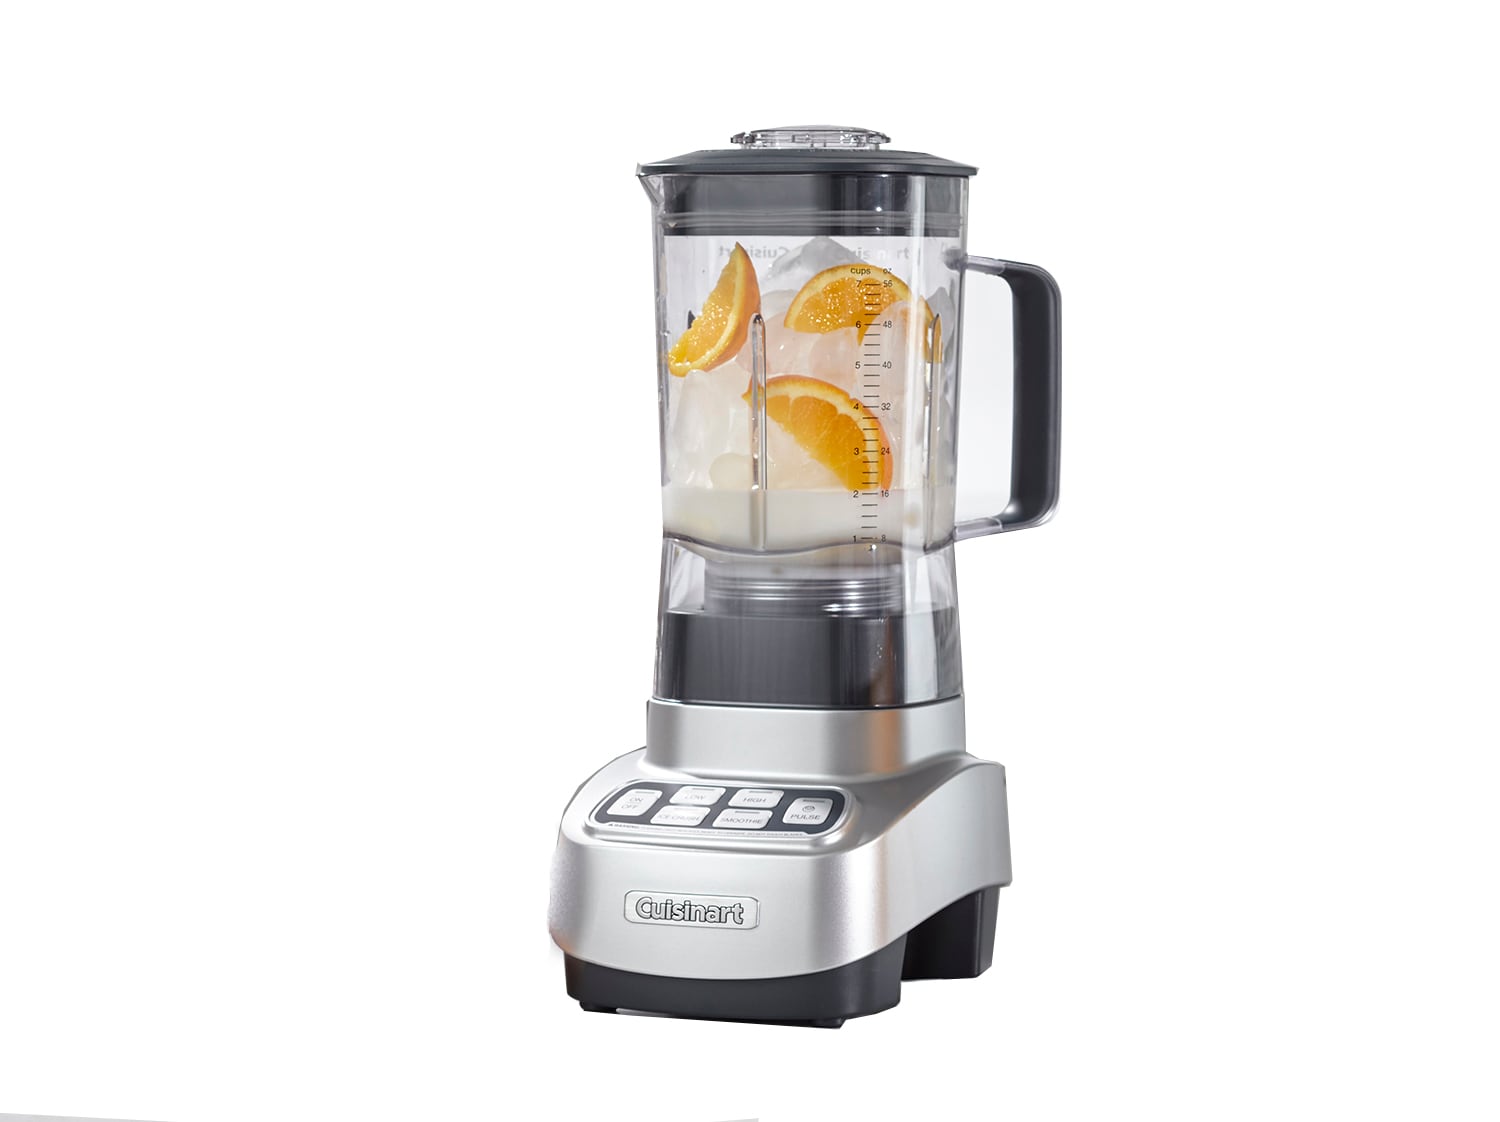 Cuisinart Velocity Ultra Blender with Electronic Controls - 10